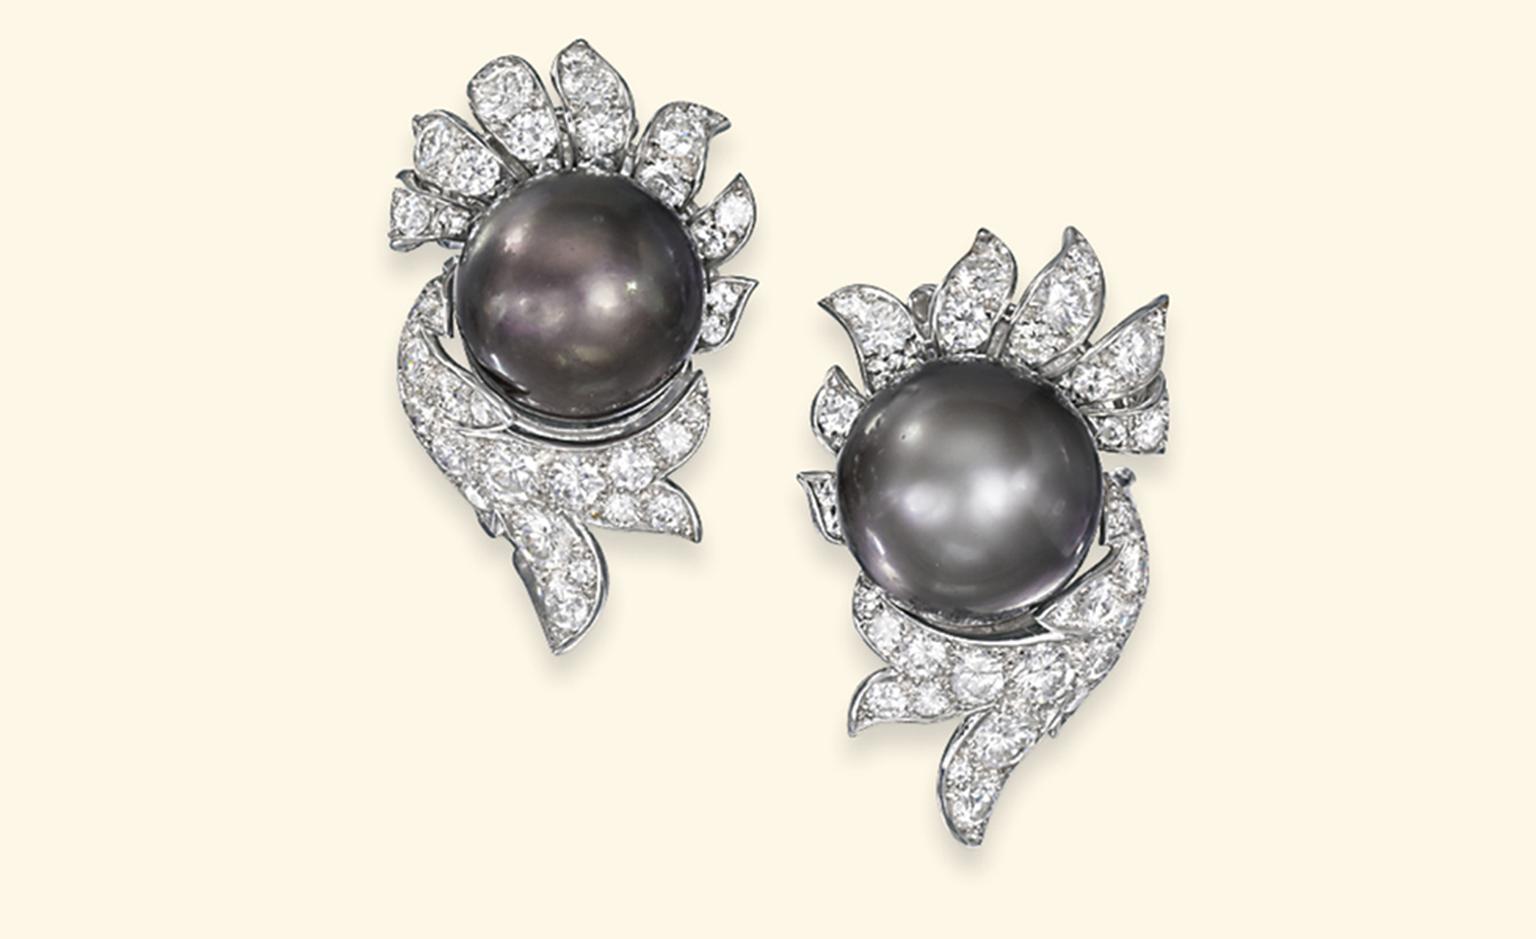 Lot 283. A pair of pearl and diamond ear clips, by Van Cleef & Arpels. Estimate £50,000-£70,000. SOLD FOR £265,250